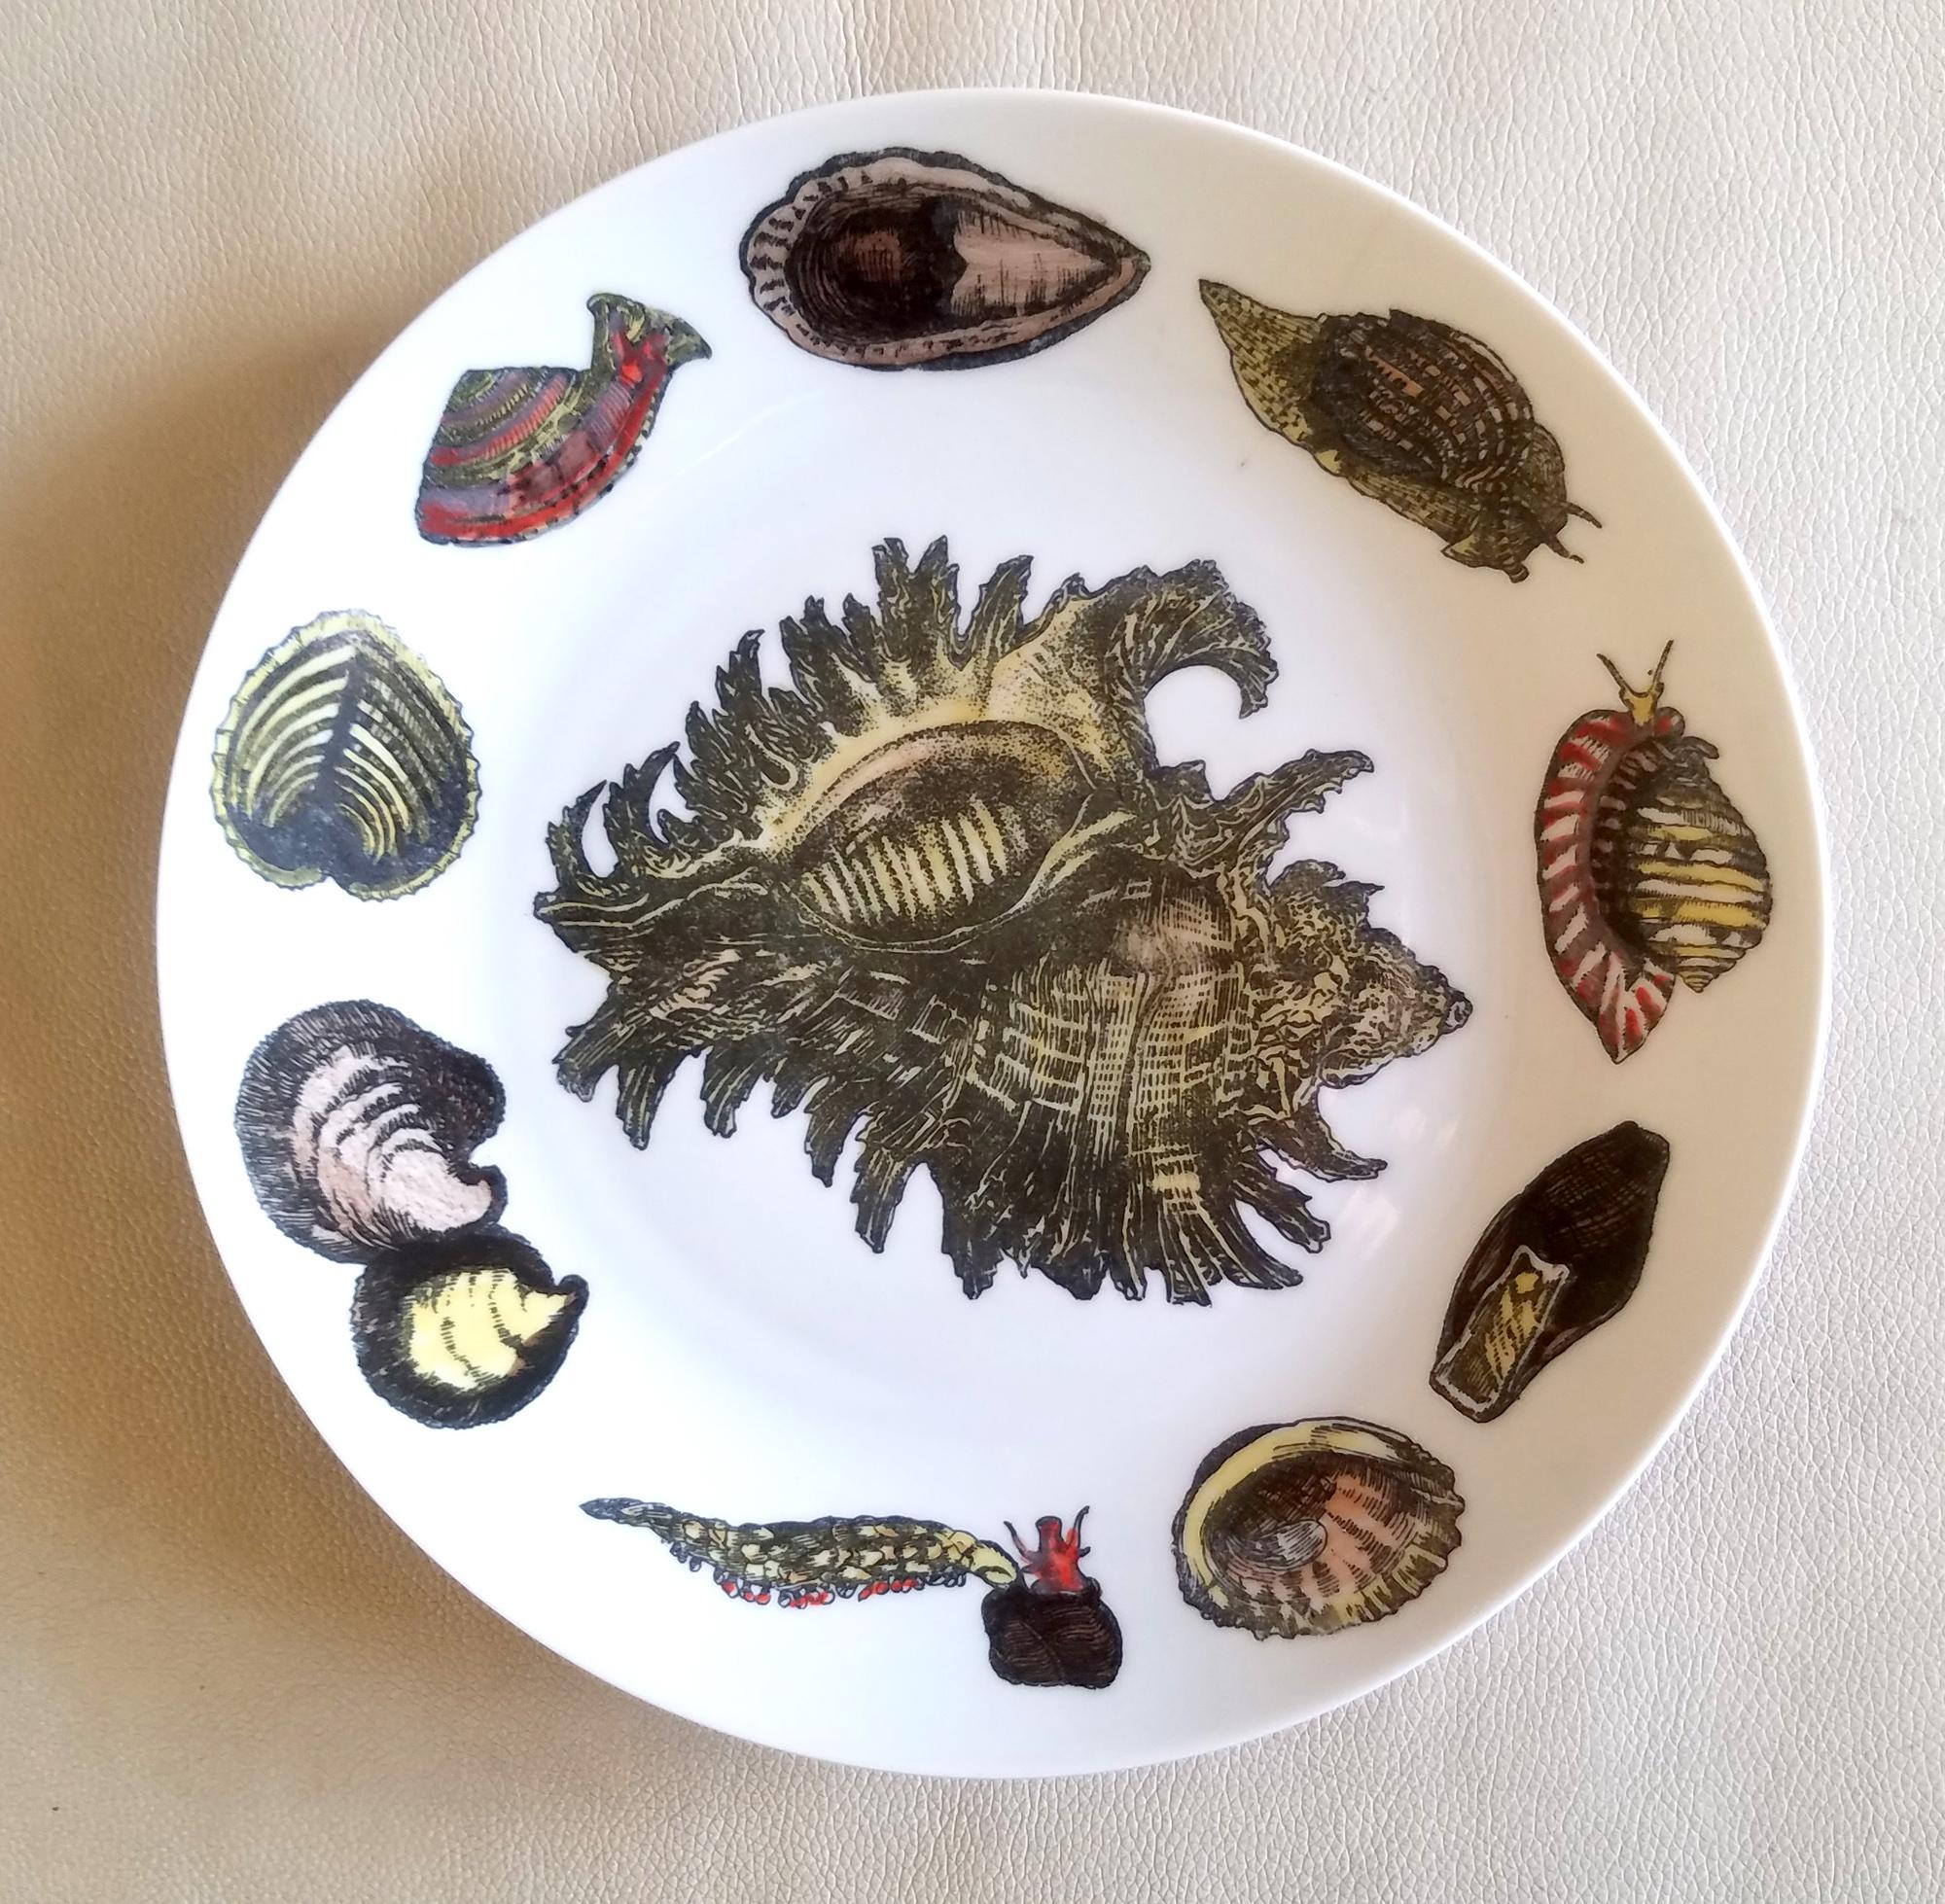 Piero Fornasetti Porcelain Conchiglie Seashell Set of Plates with Mollusks For Sale 12